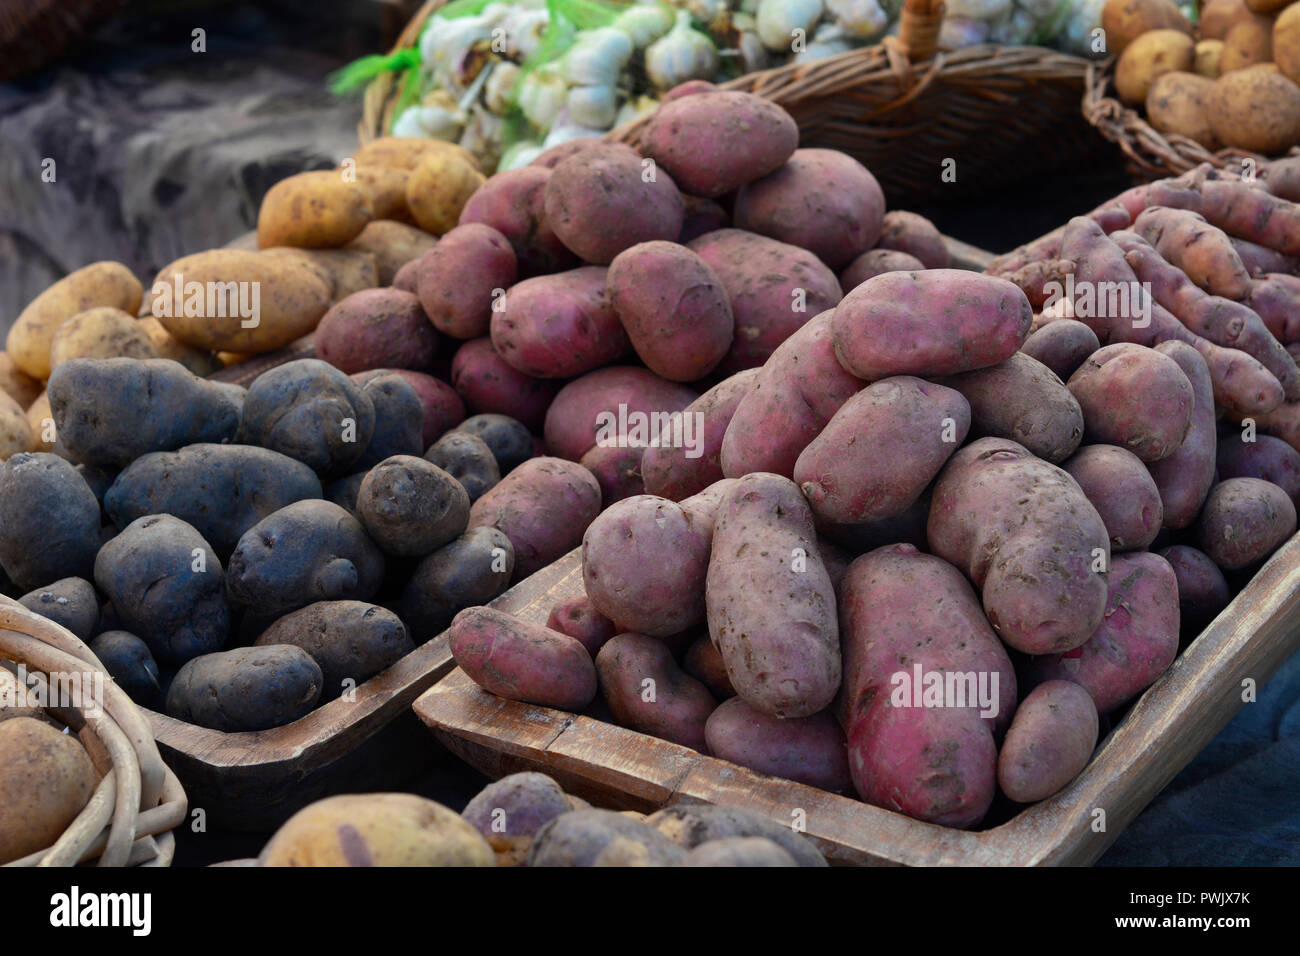 A variety of potatoes for sale at a farmers’ market in New Mexico. Stock Photo